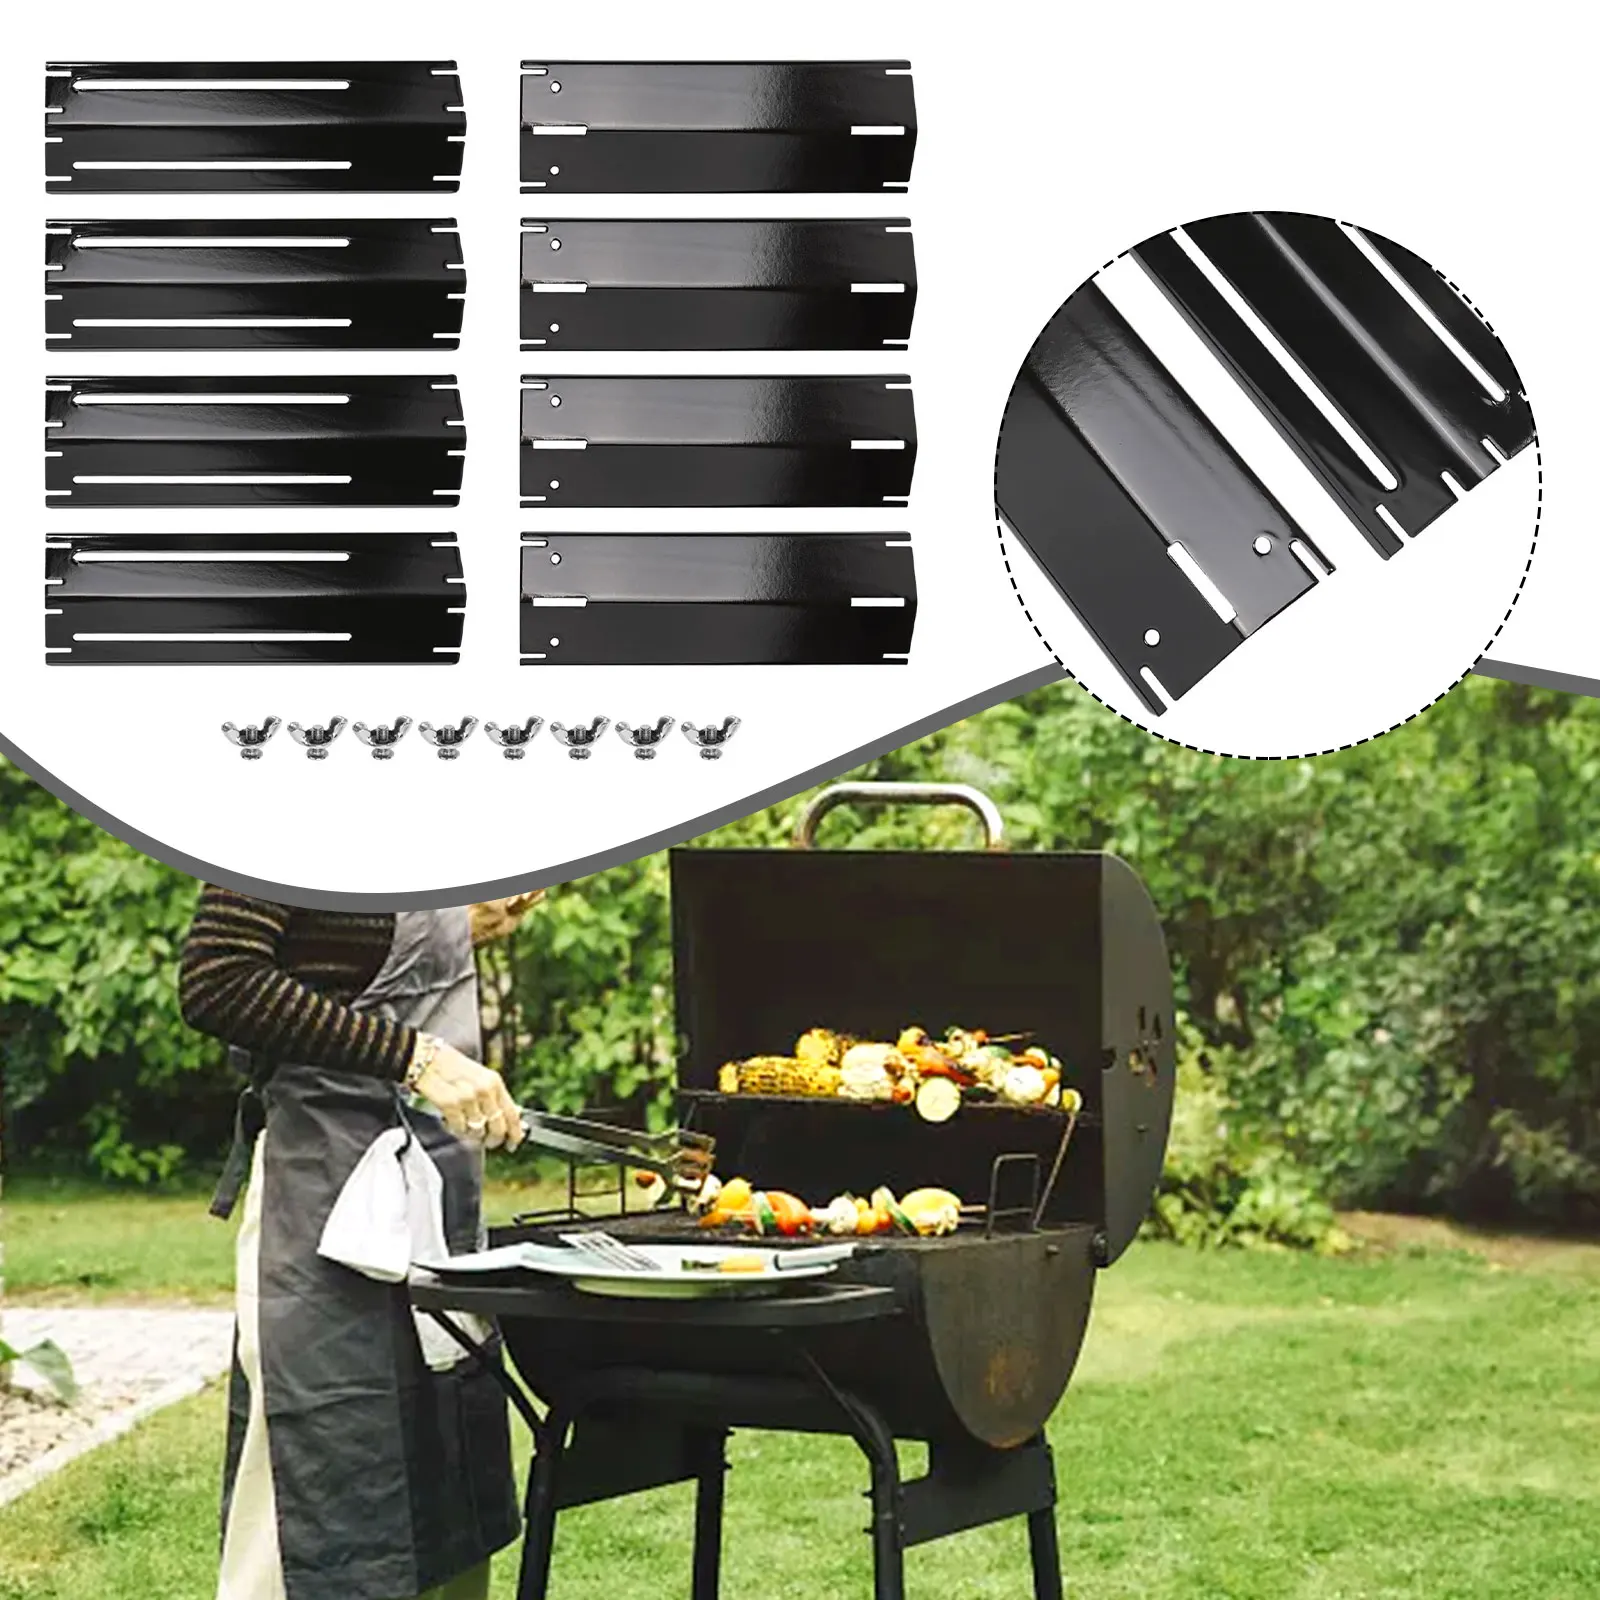 

8pcs Adjustable 298-563mm Stainless Steel Heat Plate Kit BBQ Gas Grill Replacement Set Outdoor Garden BBQ Tools Accessories